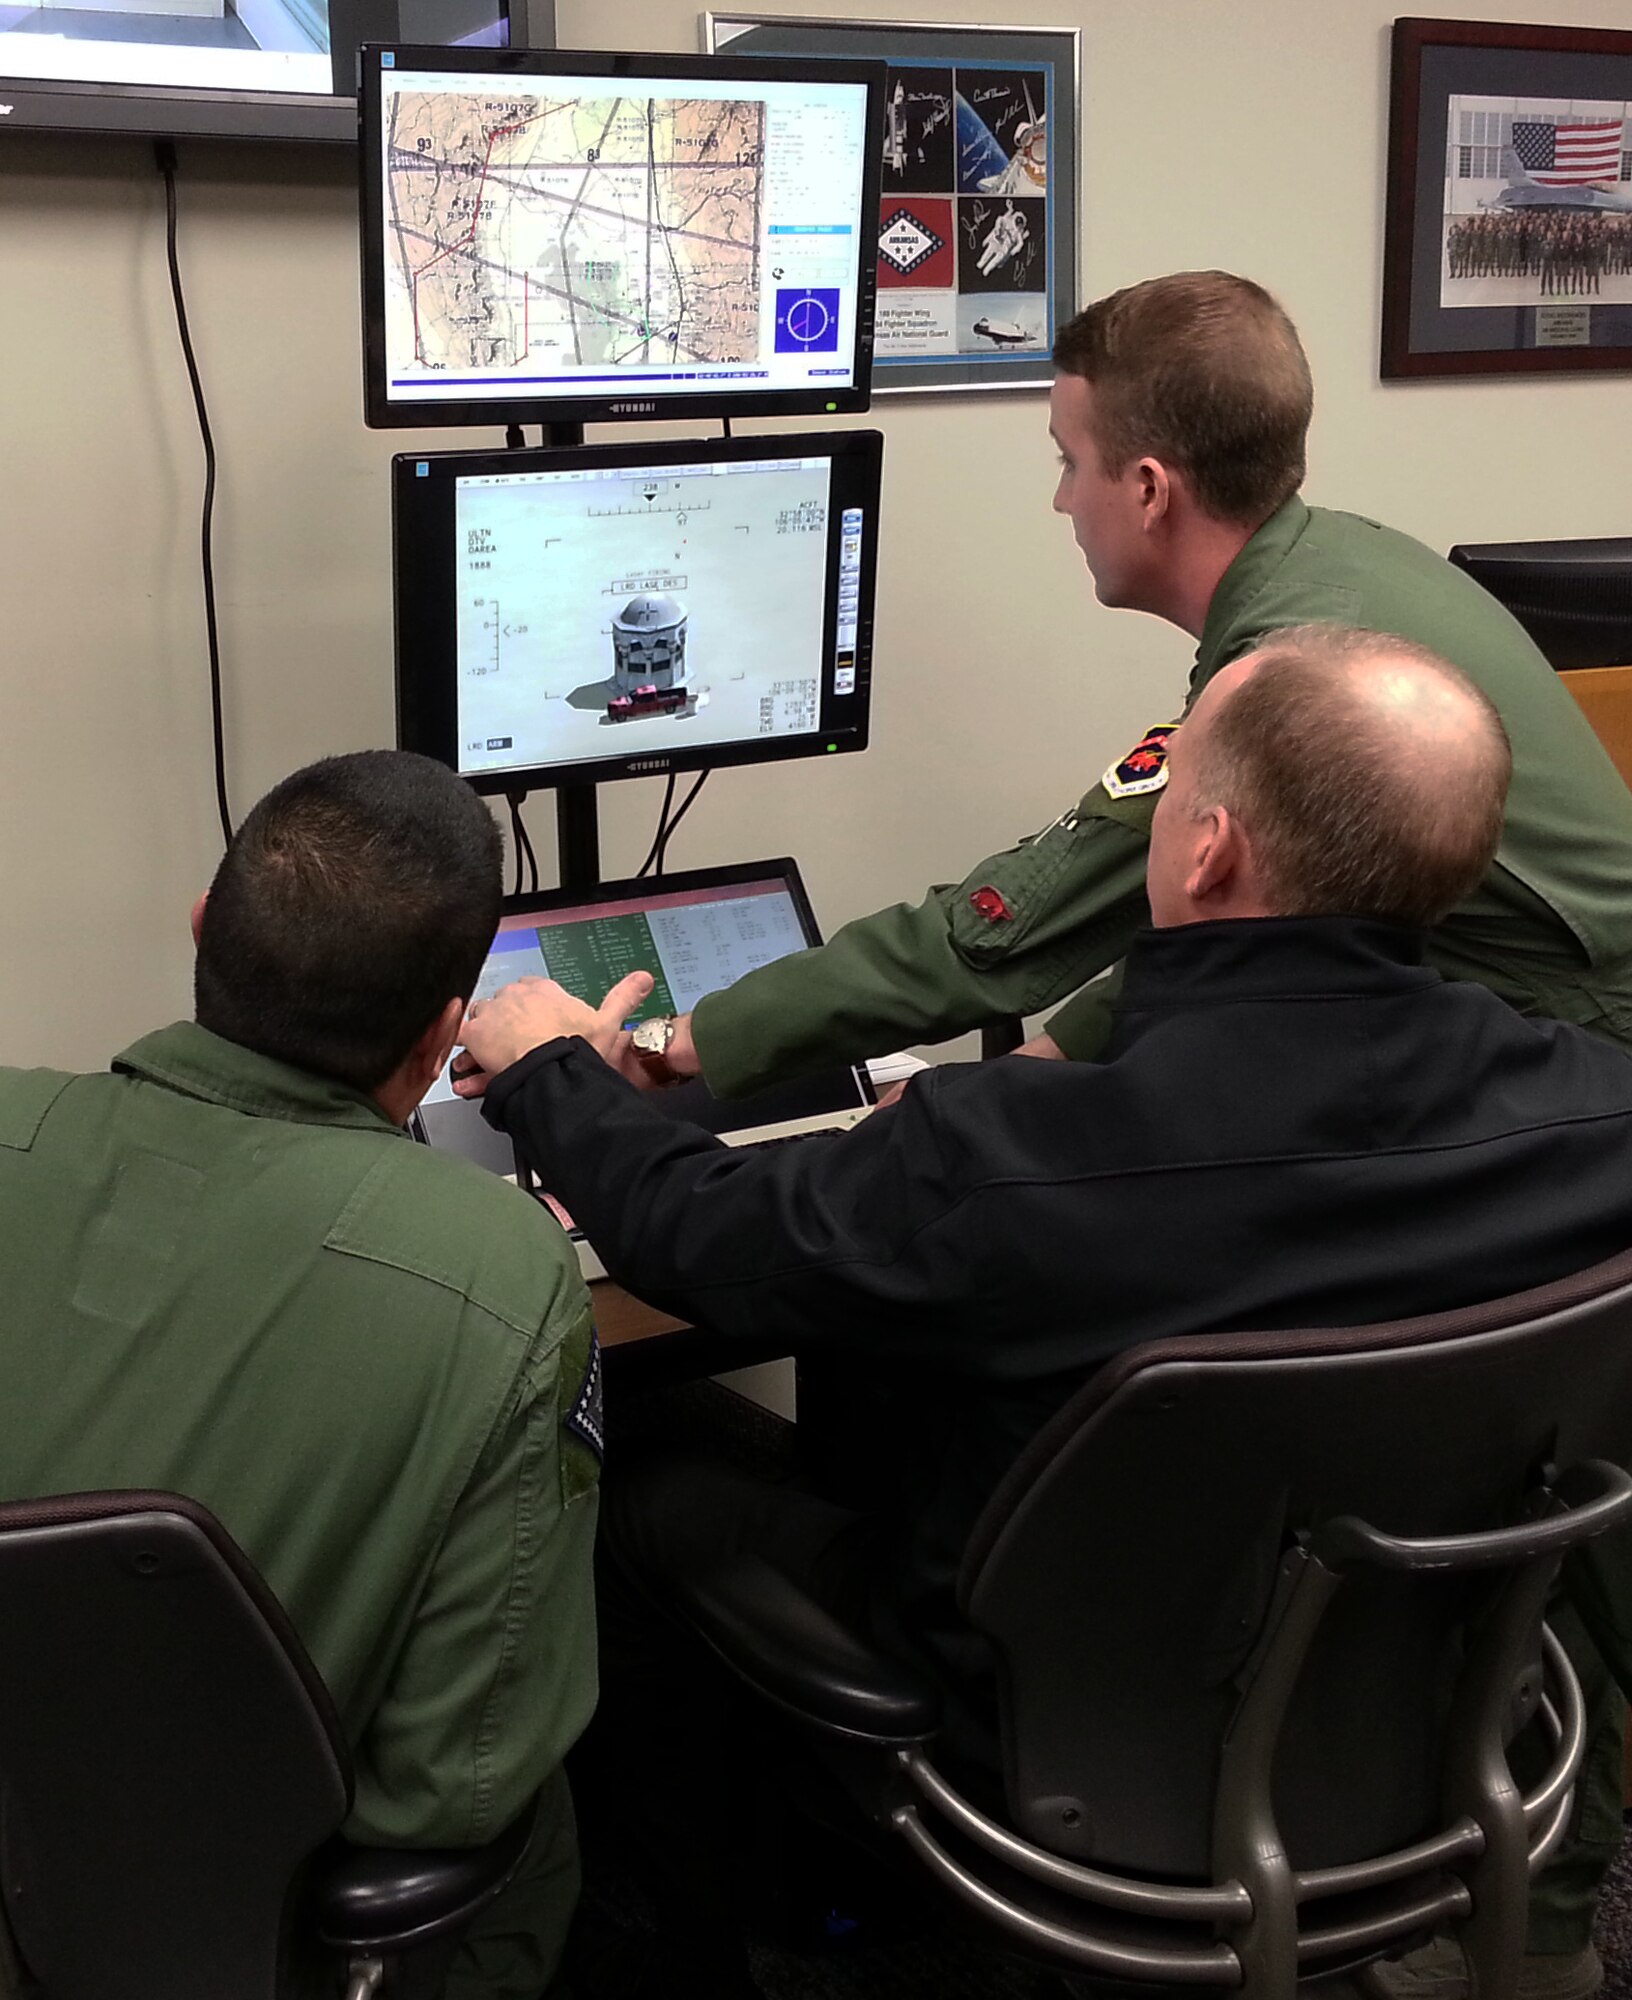 Brad Hegeman, President of Nabholz Construction Services, operates the 188th Wing’s Predator Reaper Integrated Mission Environment simulator alongside members of the 188th Operations Group Feb. 26, 2015. Hegeman is also the president of the Little Rock Air Force Base Community Council and a member of the Chief of Staff of the Air Force Civic Leader Program. The CSAF Civic Leader Program is an Air Staff-level program comprised of respected community leaders selected by officials from Air Force major commands, the National Guard Bureau and Headquarters Air Force. Hegeman toured the 188th Wing and received a mission and capabilities briefing during his visit. (U.S. Air National Guard photo by Maj. Heath Allen/released)